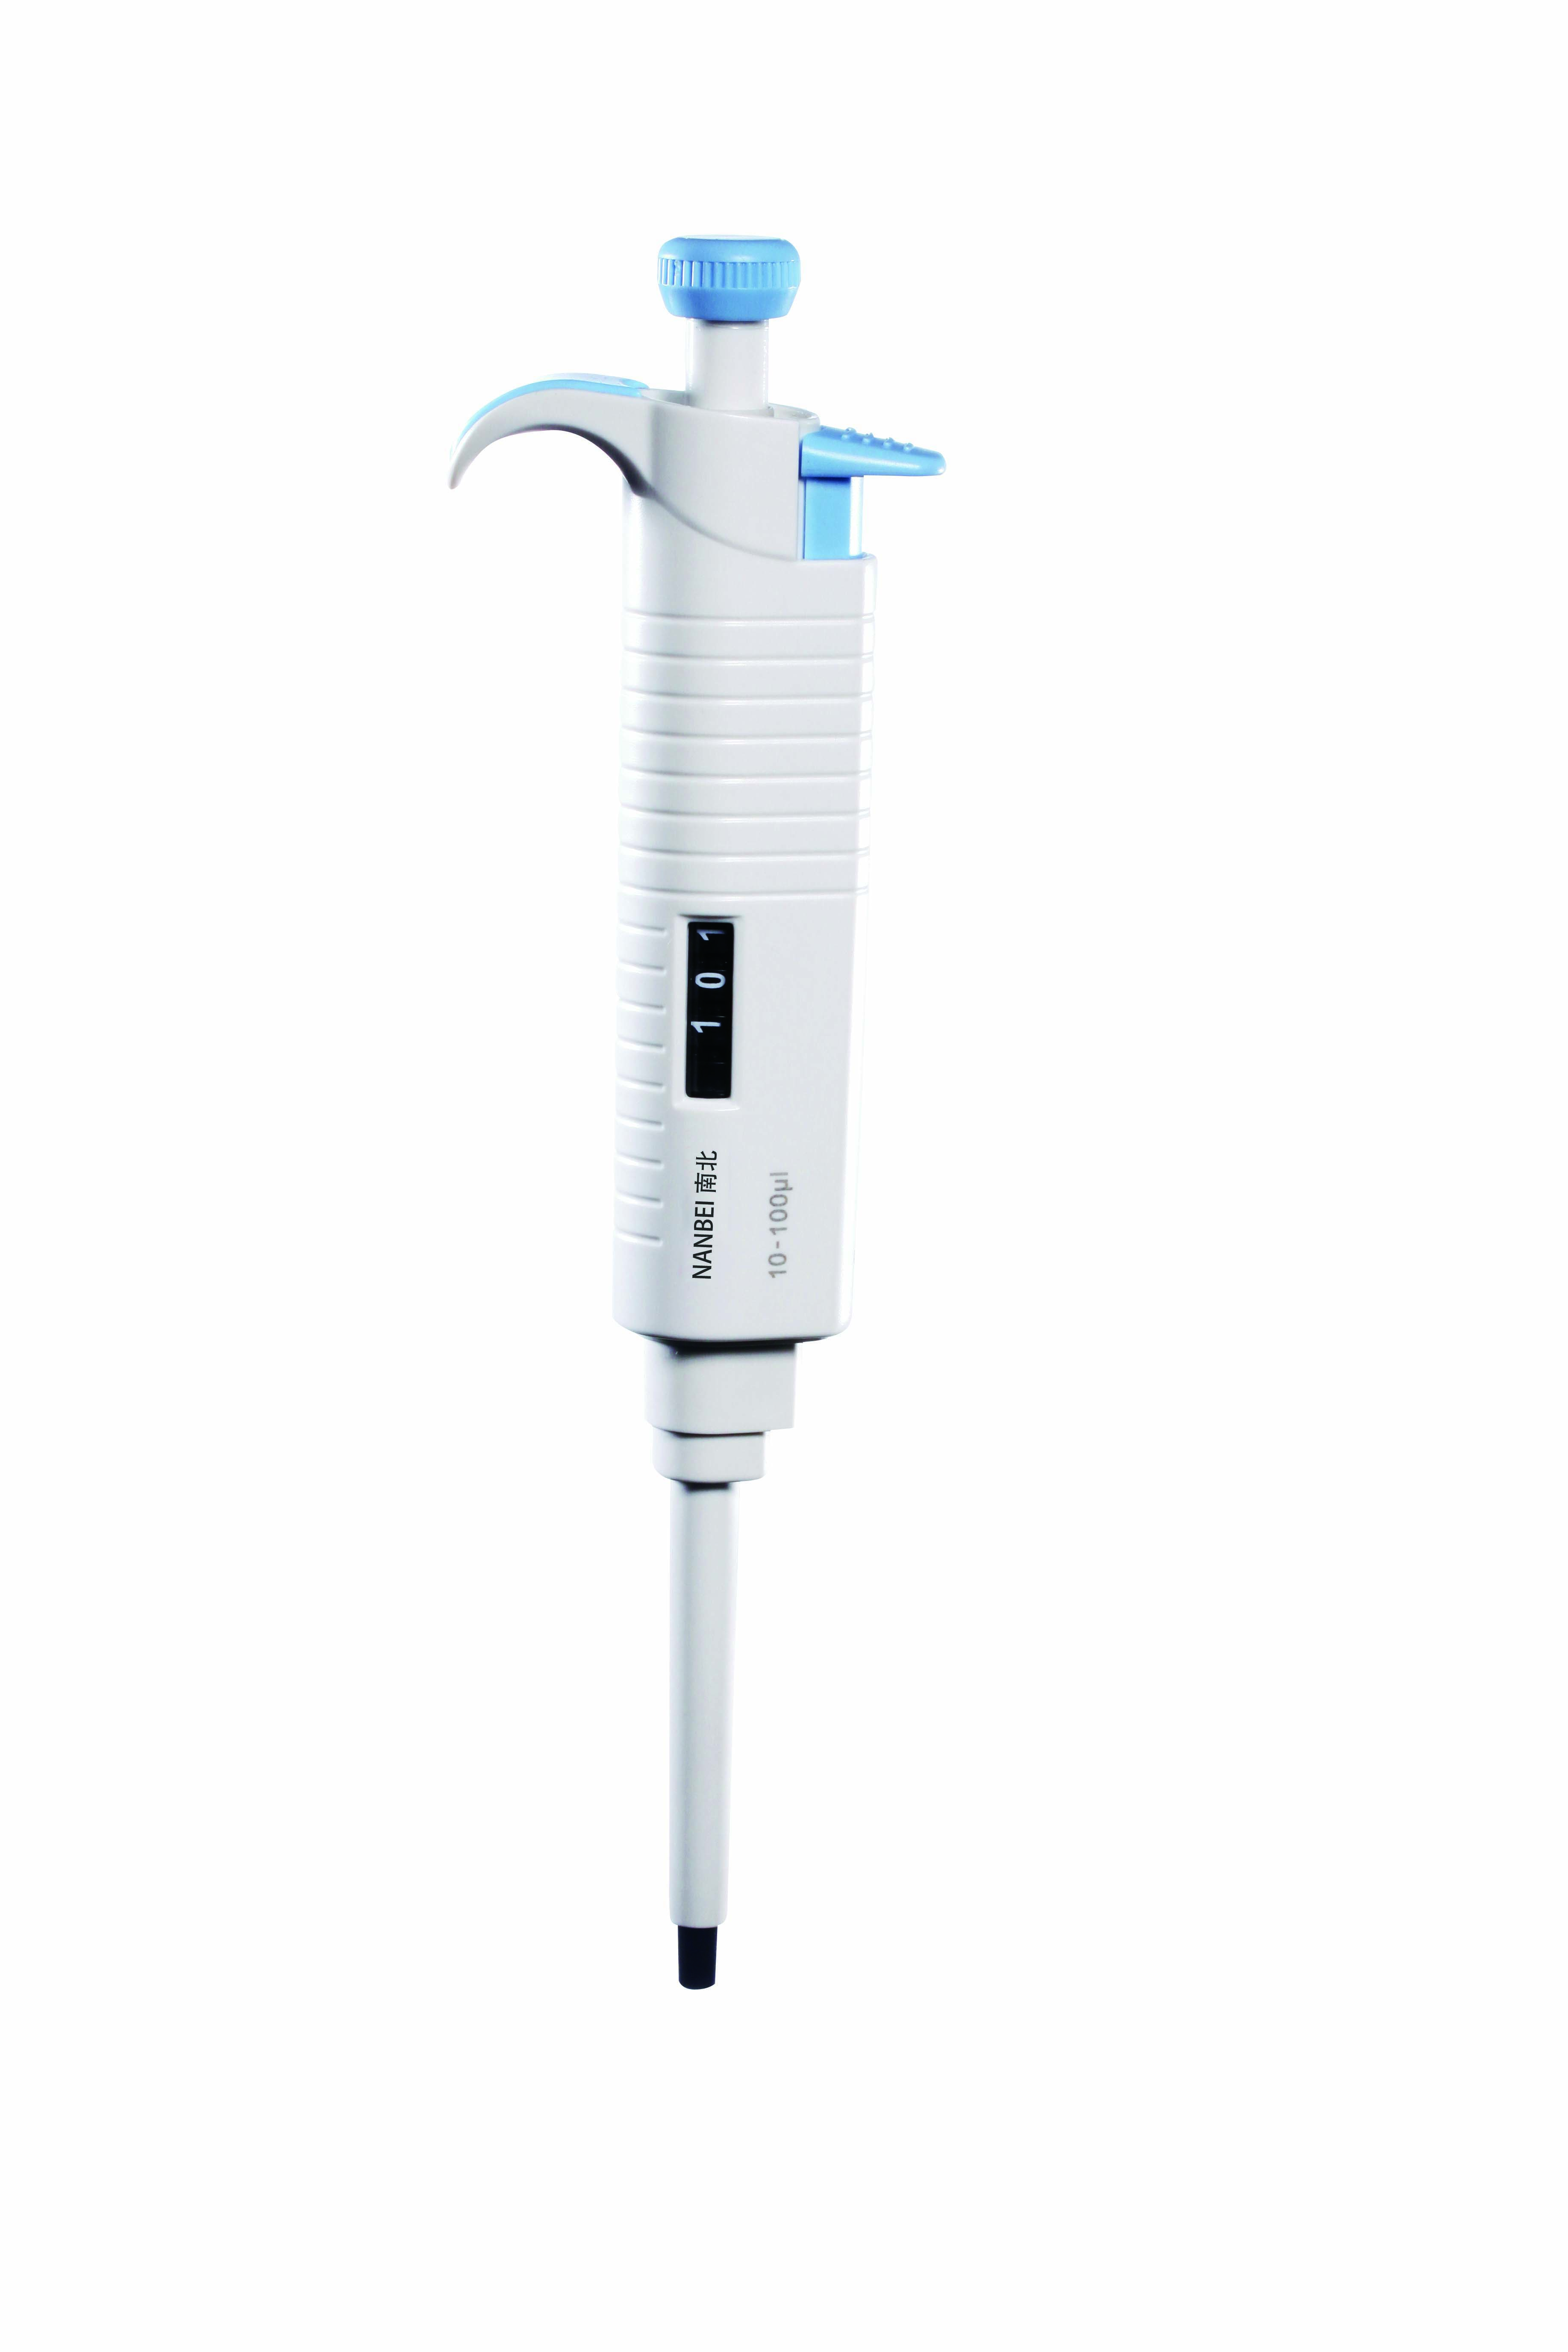 MicroPette Plus Mechanical Pipettes